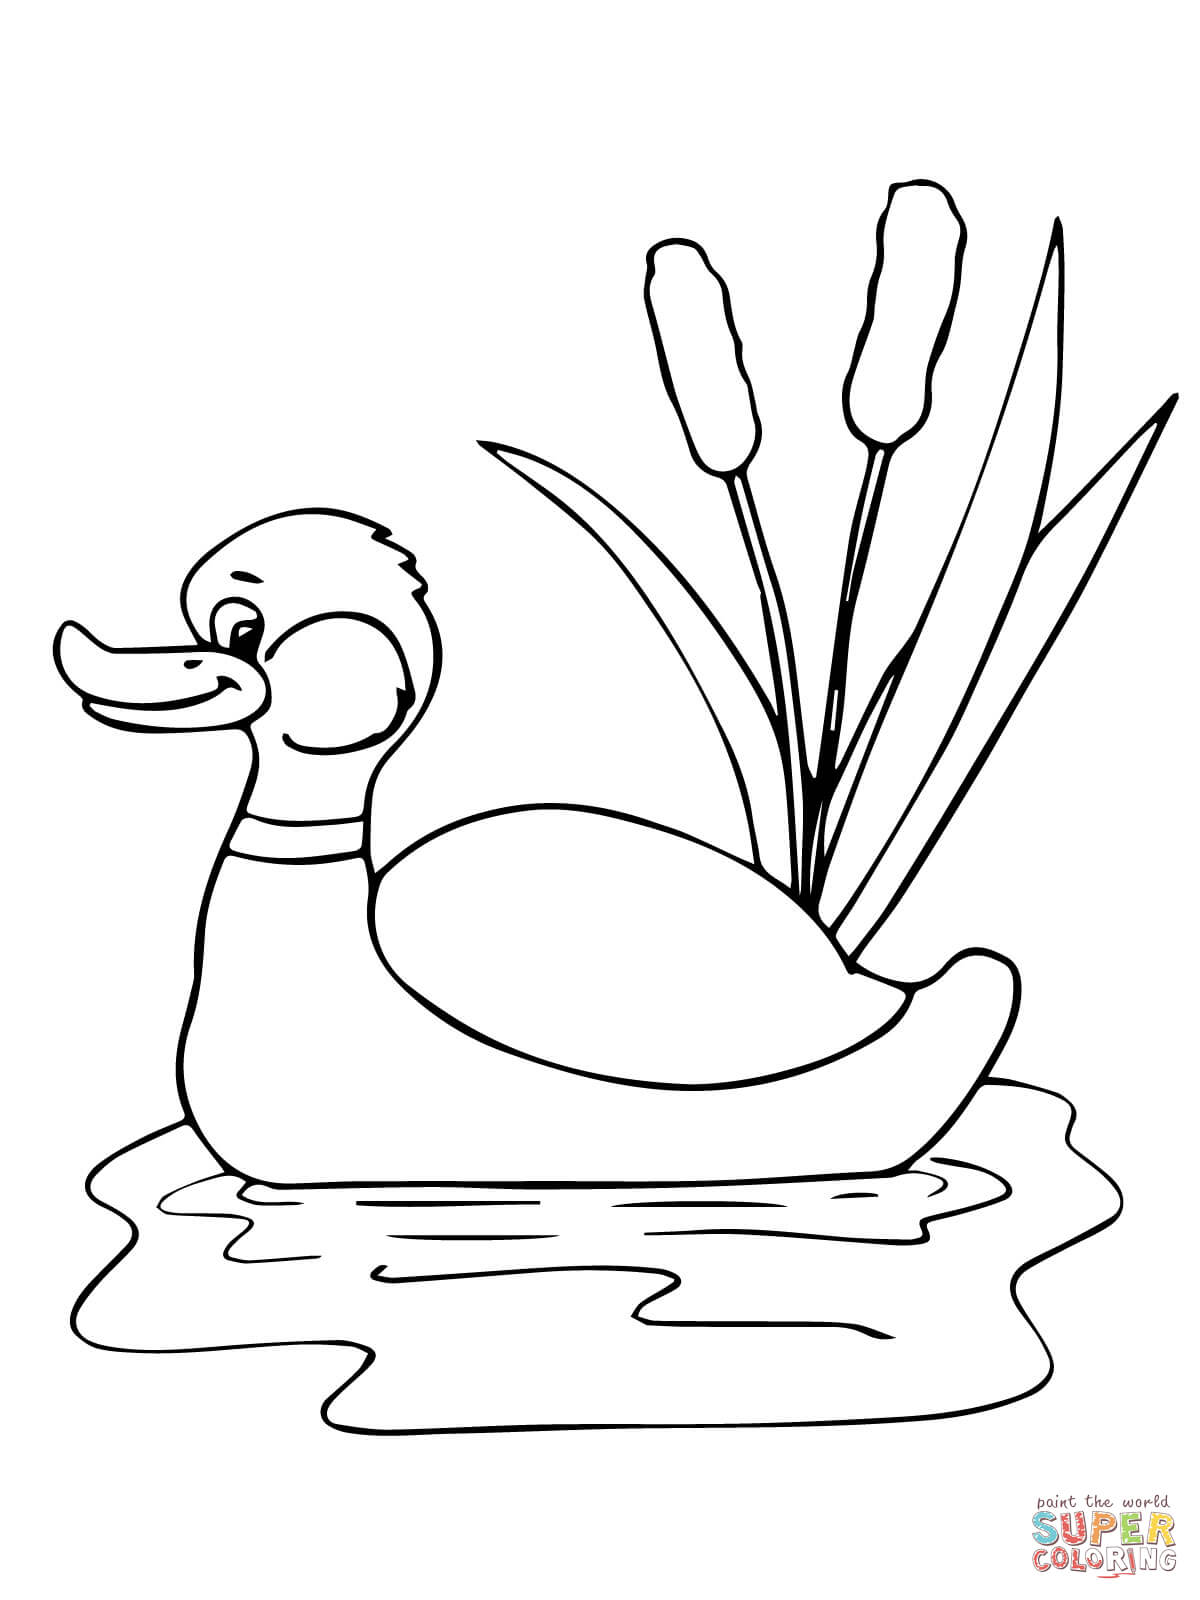 pond coloring pages duck pond drawing at getdrawingscom free for personal pages pond coloring 